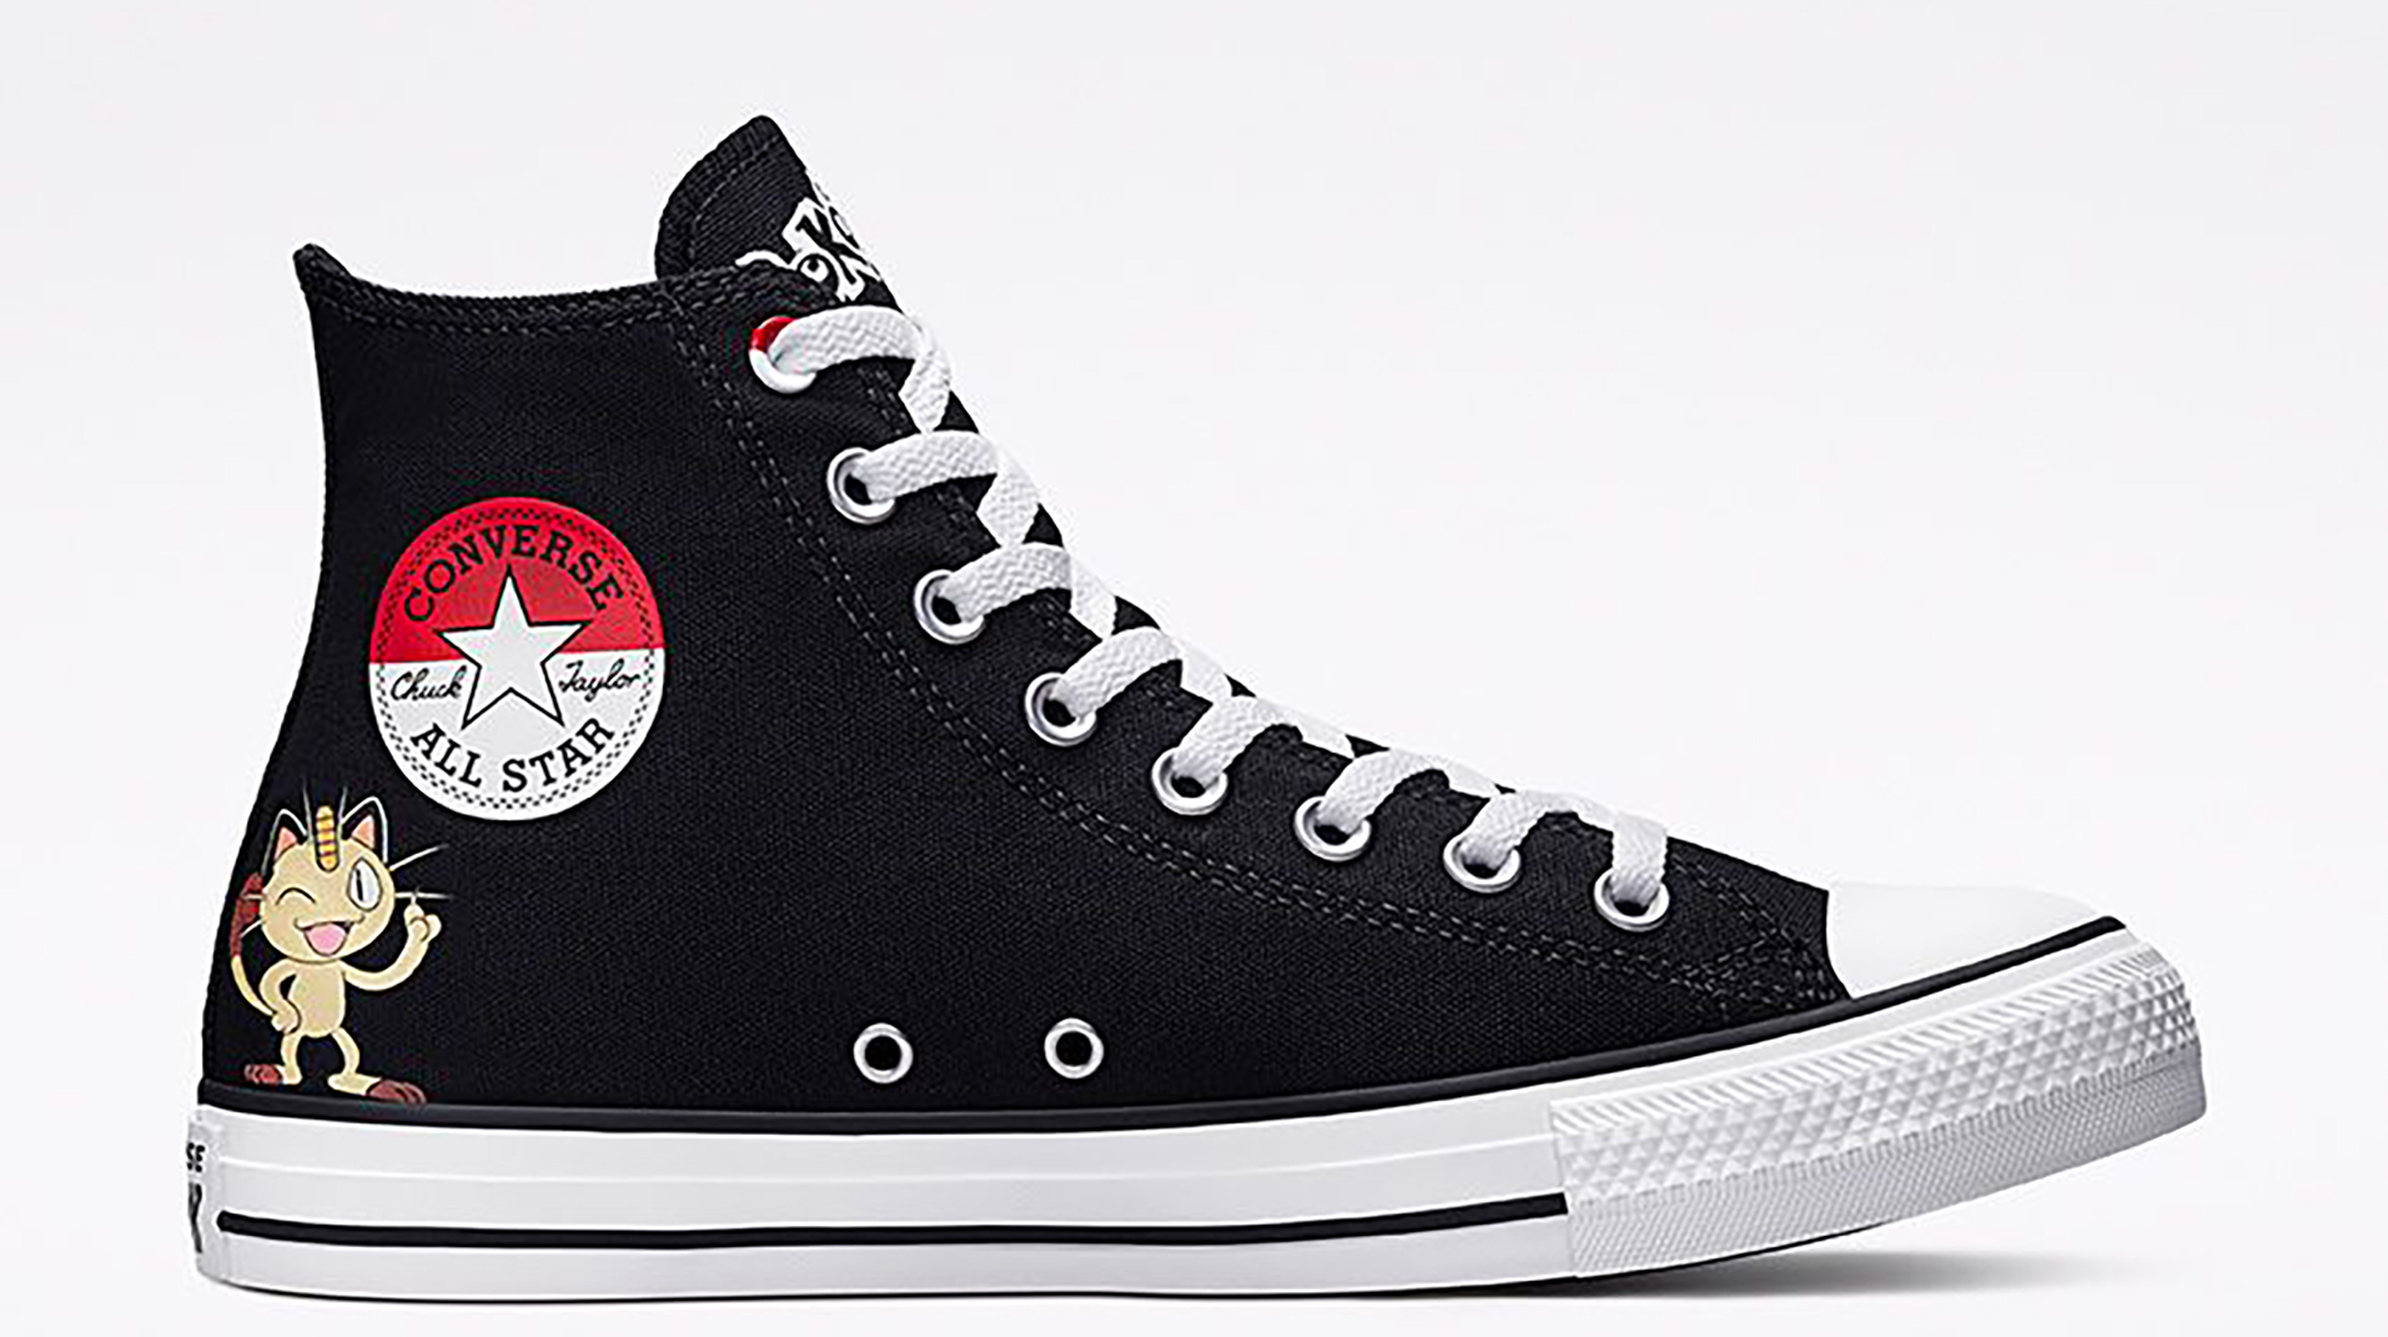 Pokémon meets Converse in new collection thumbnail